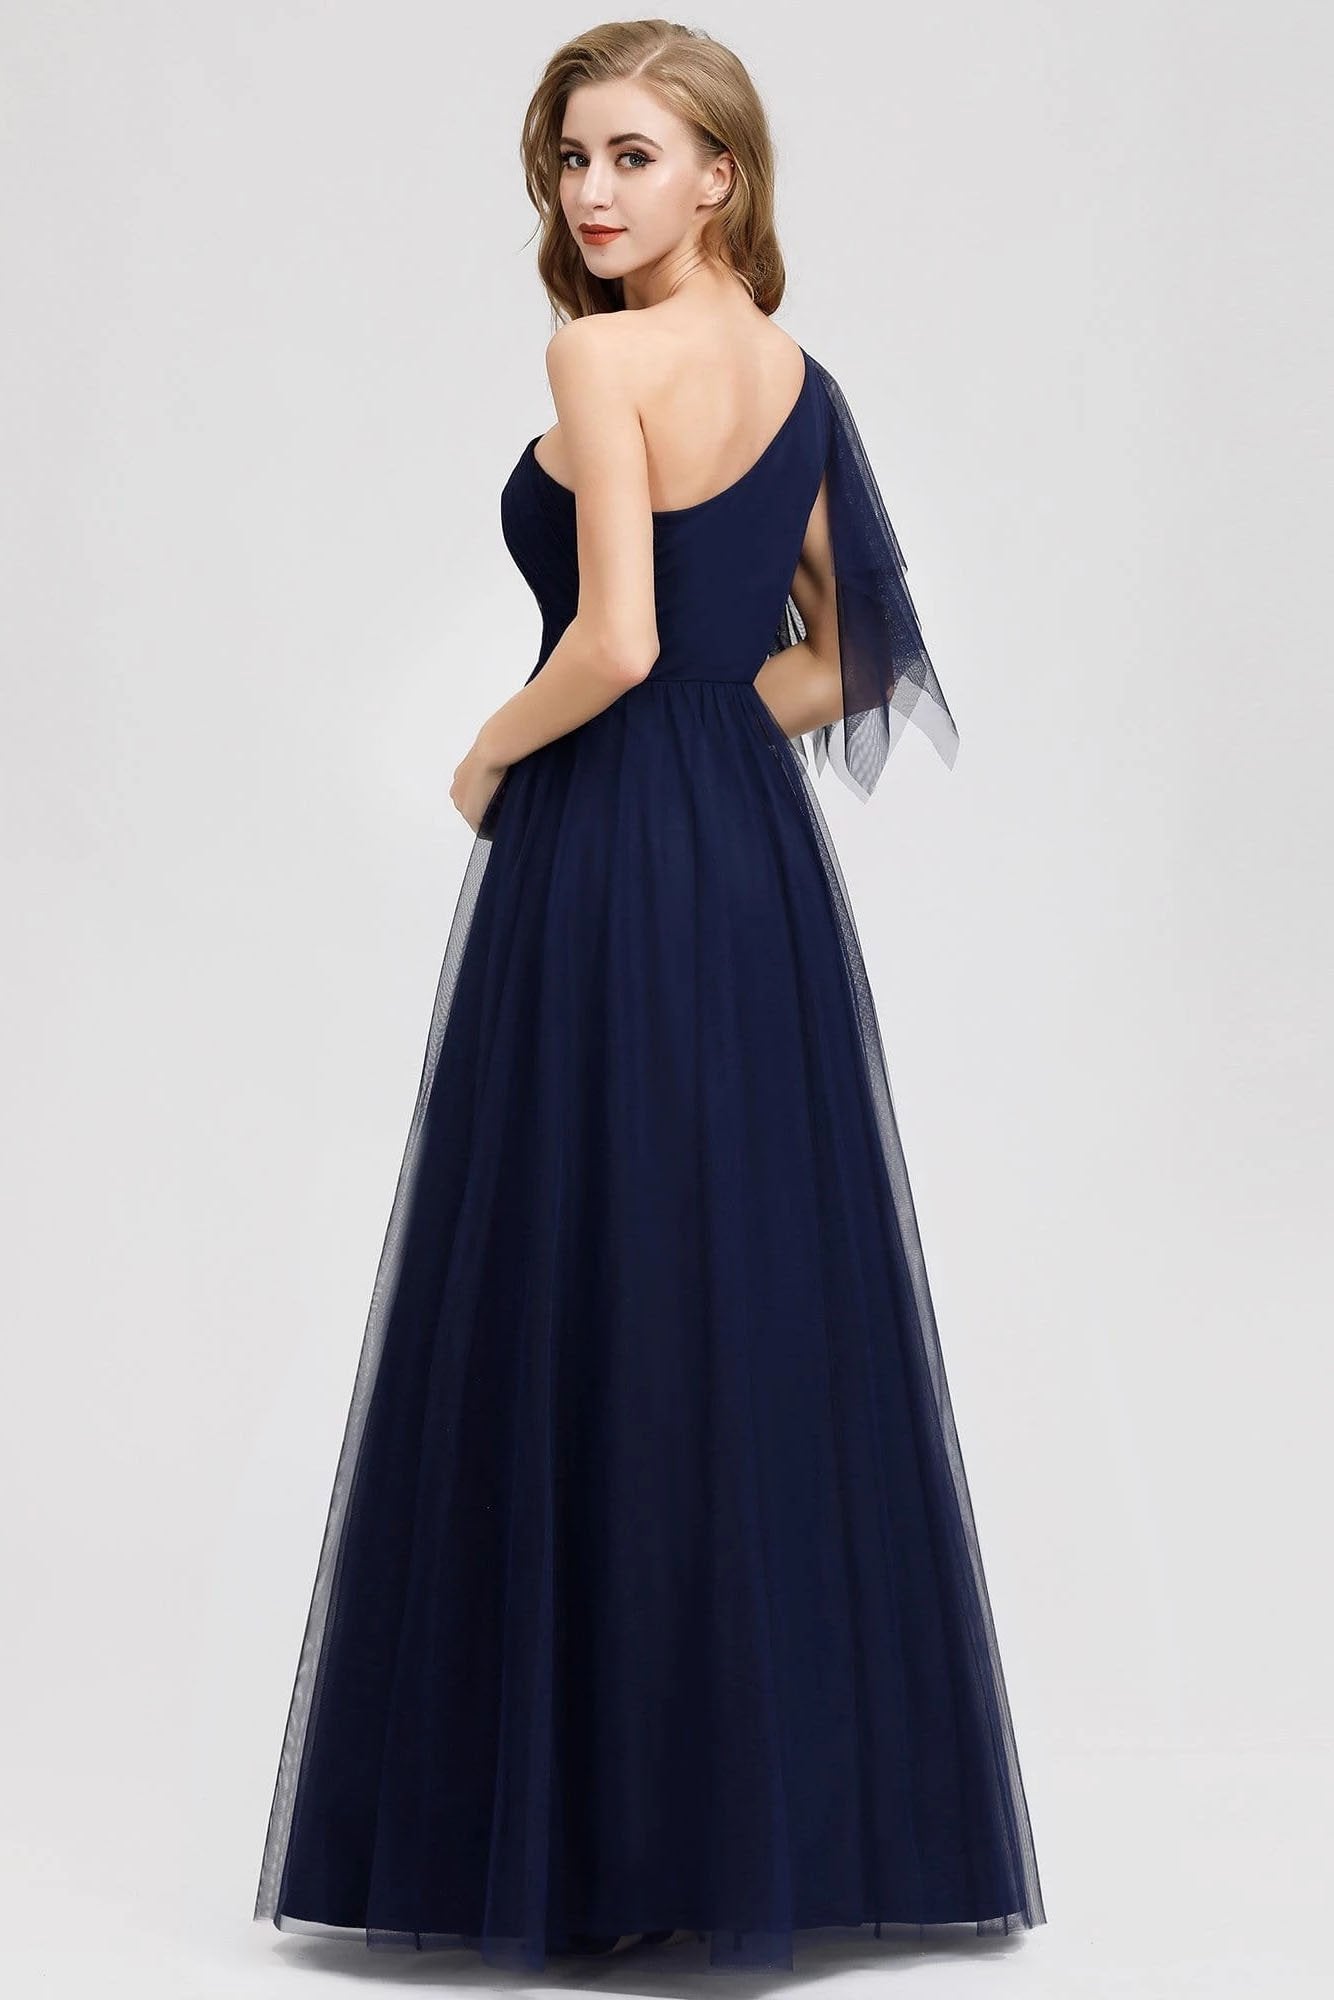 Simple A Line One Shoulder Navy Blue Tulle Prom Dresses Cheap Formal Dresses STC15382